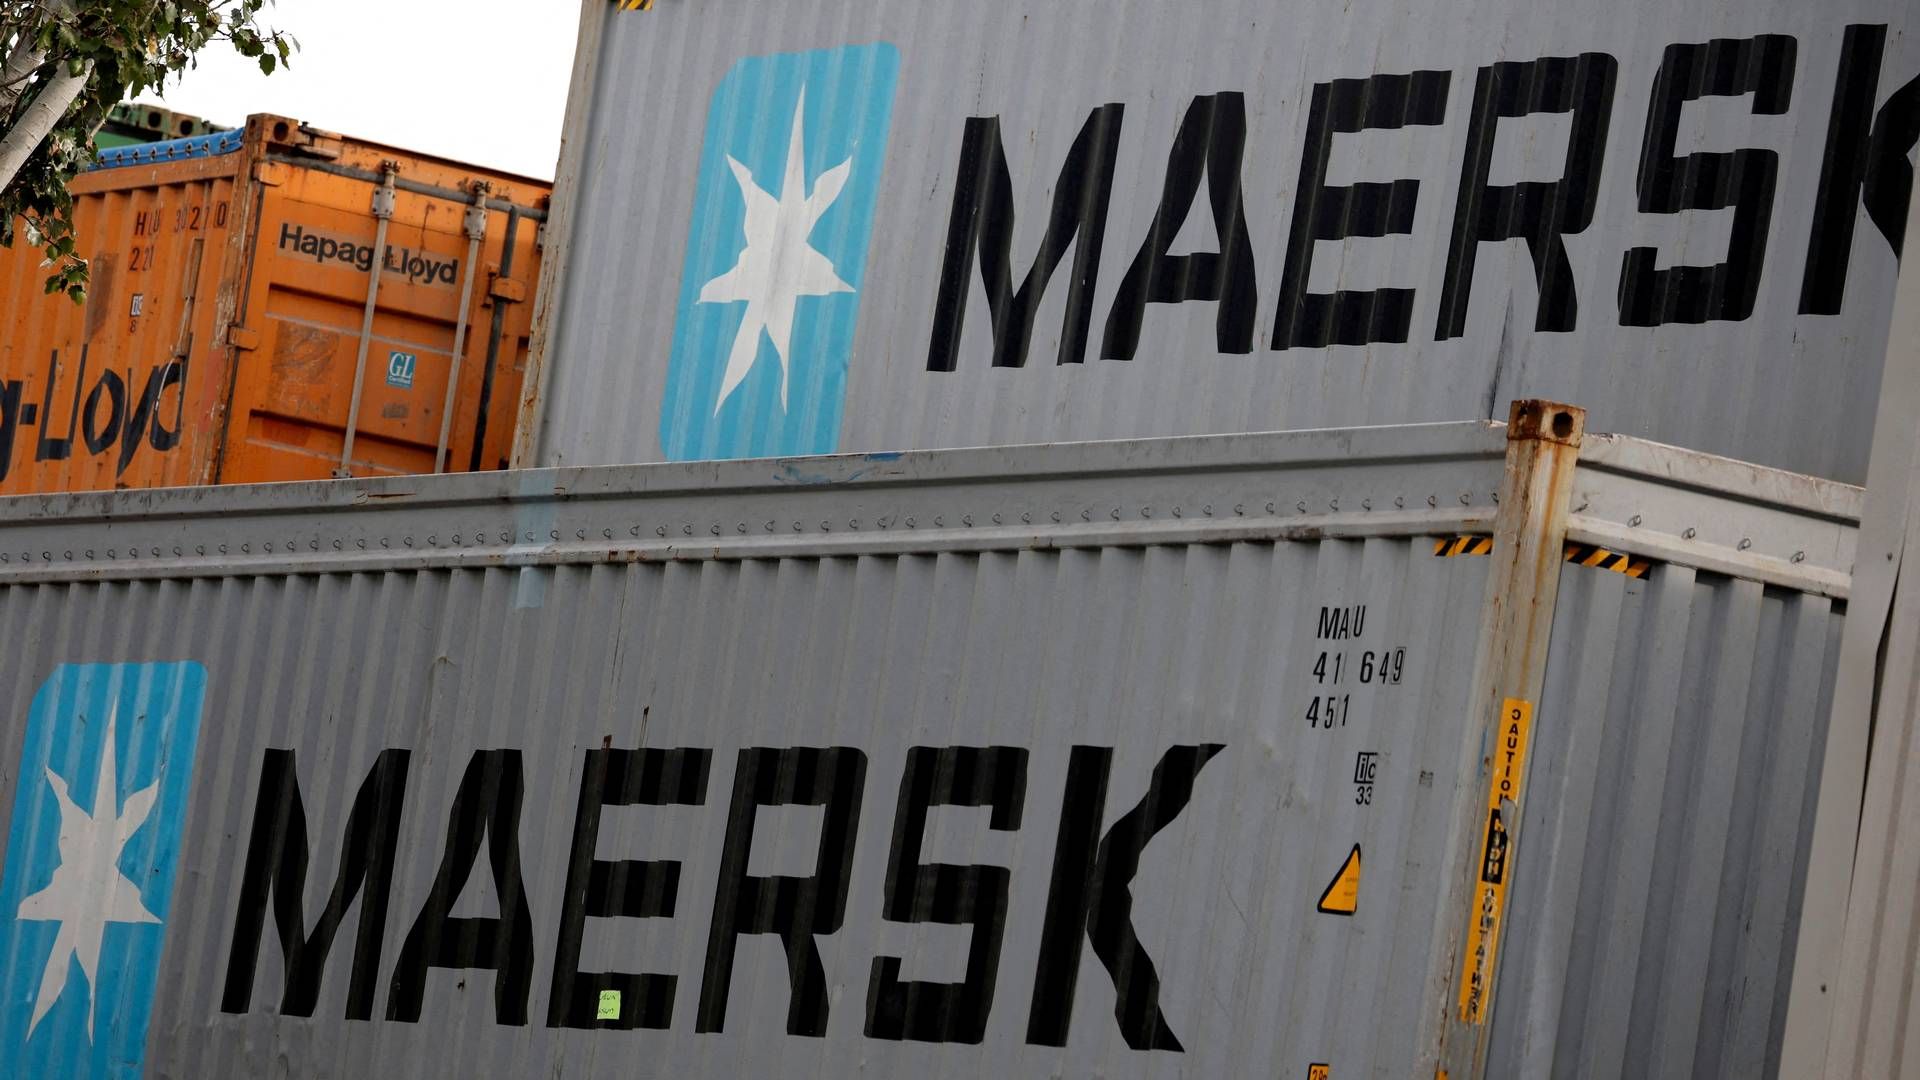 Maersk Line Limited dismissed a former employee in 2021 for complaining about safety without first informing the company, according to a US court ruling. | Photo: Albert Gea/Reuters/Ritzau Scanpix